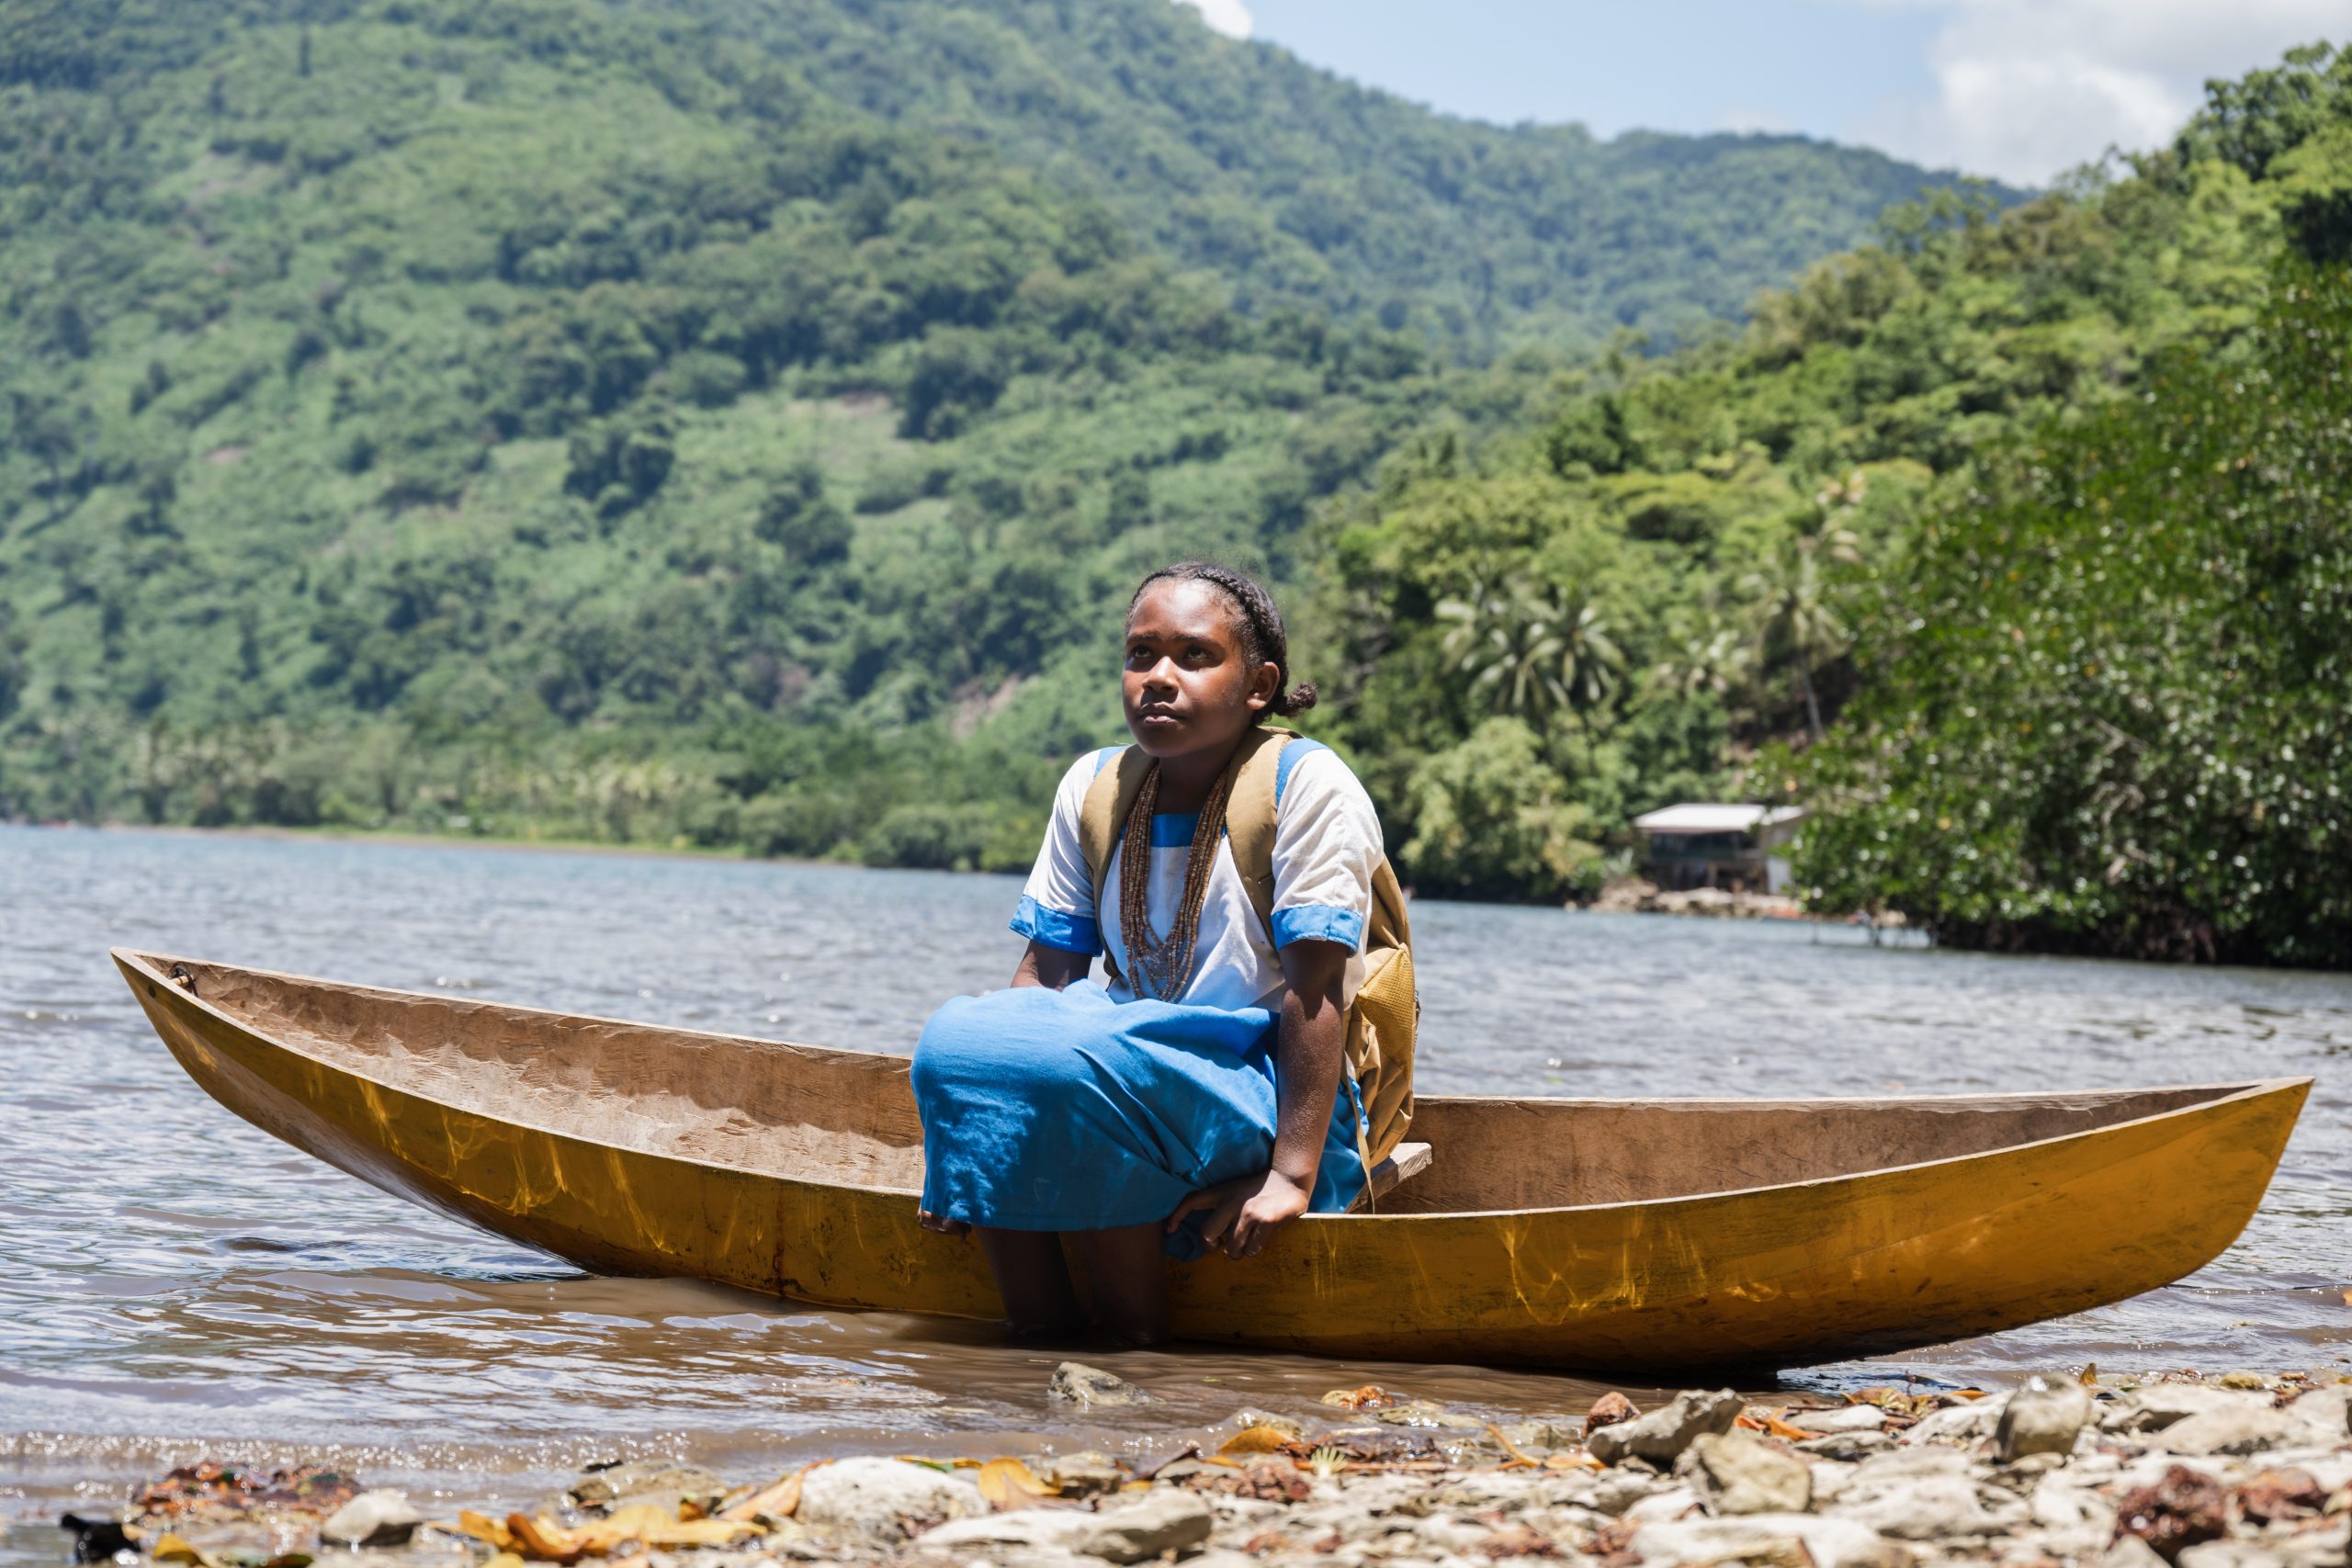 East Are’are, Solomon Islands: Shirley lives with her family in East Are’are and uses a canoe to travel to school because the coastal footpaths are eroded. The people in her community in East Are’are are trying to adapt to radical environmental changes resulting from climate change. Photo: Ivan Utahenua/Oxfam